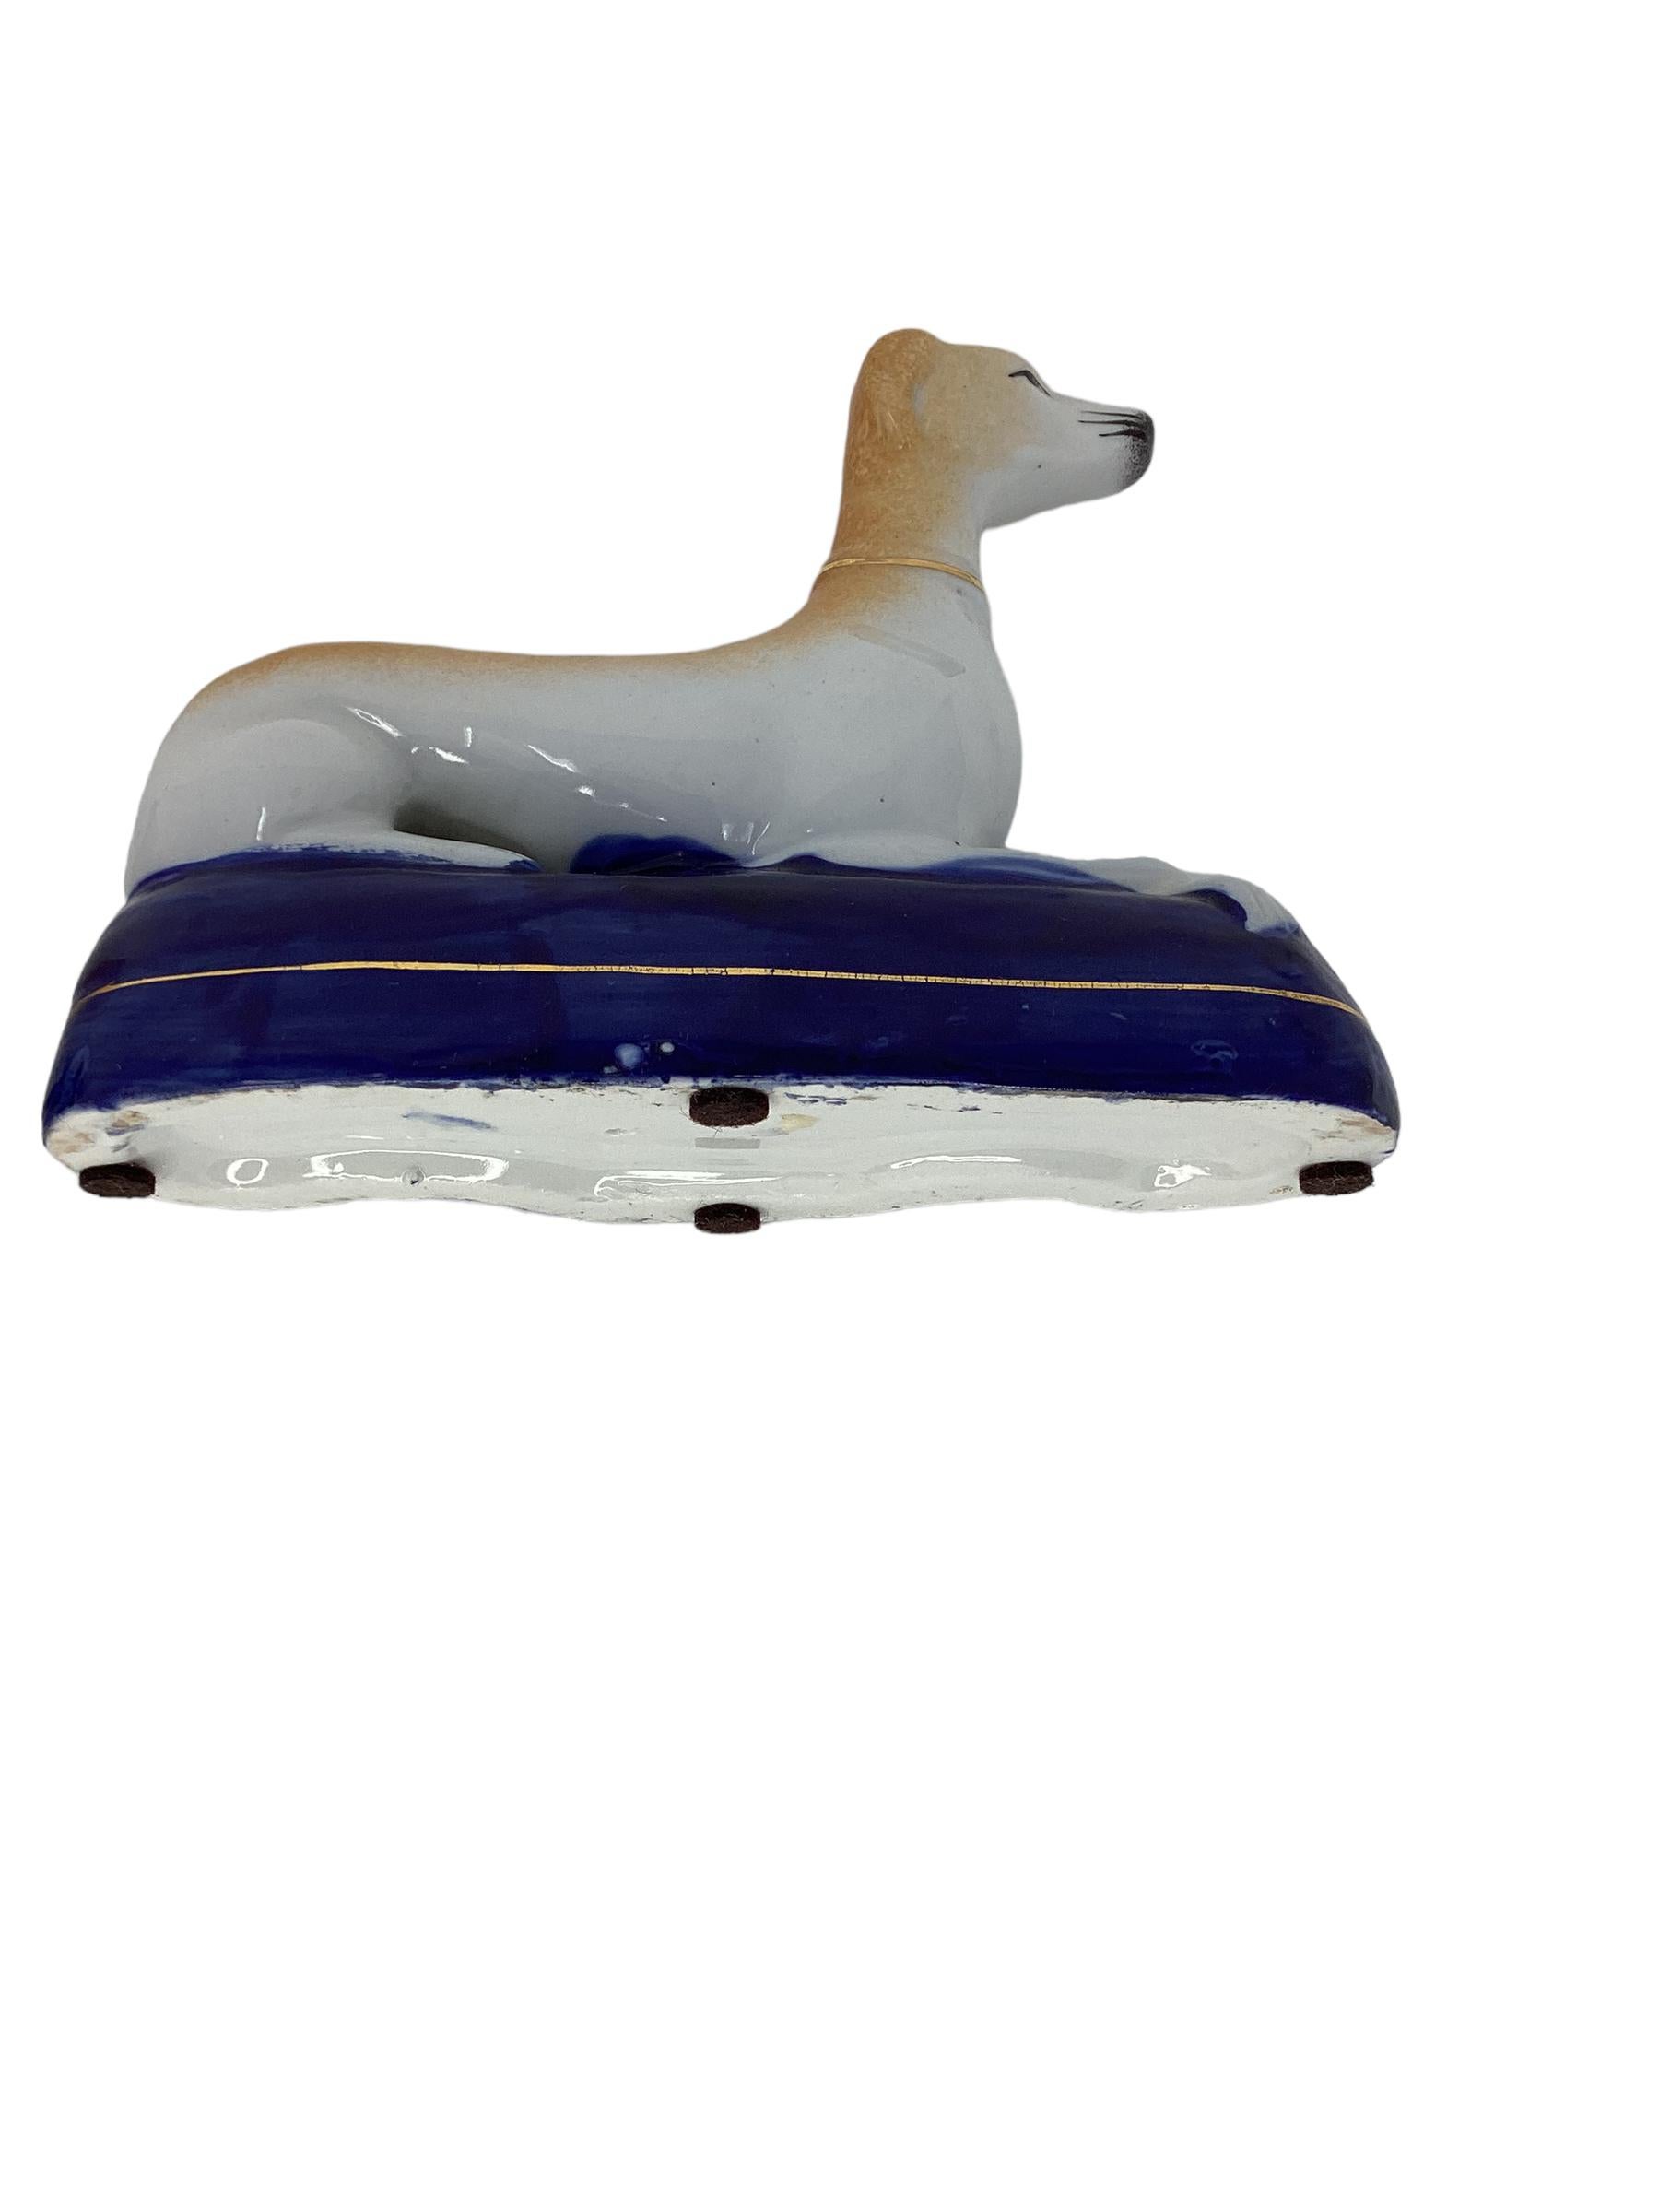 Early 20th Century Pair of Staffordshire Pottery Greyhound or Whippets